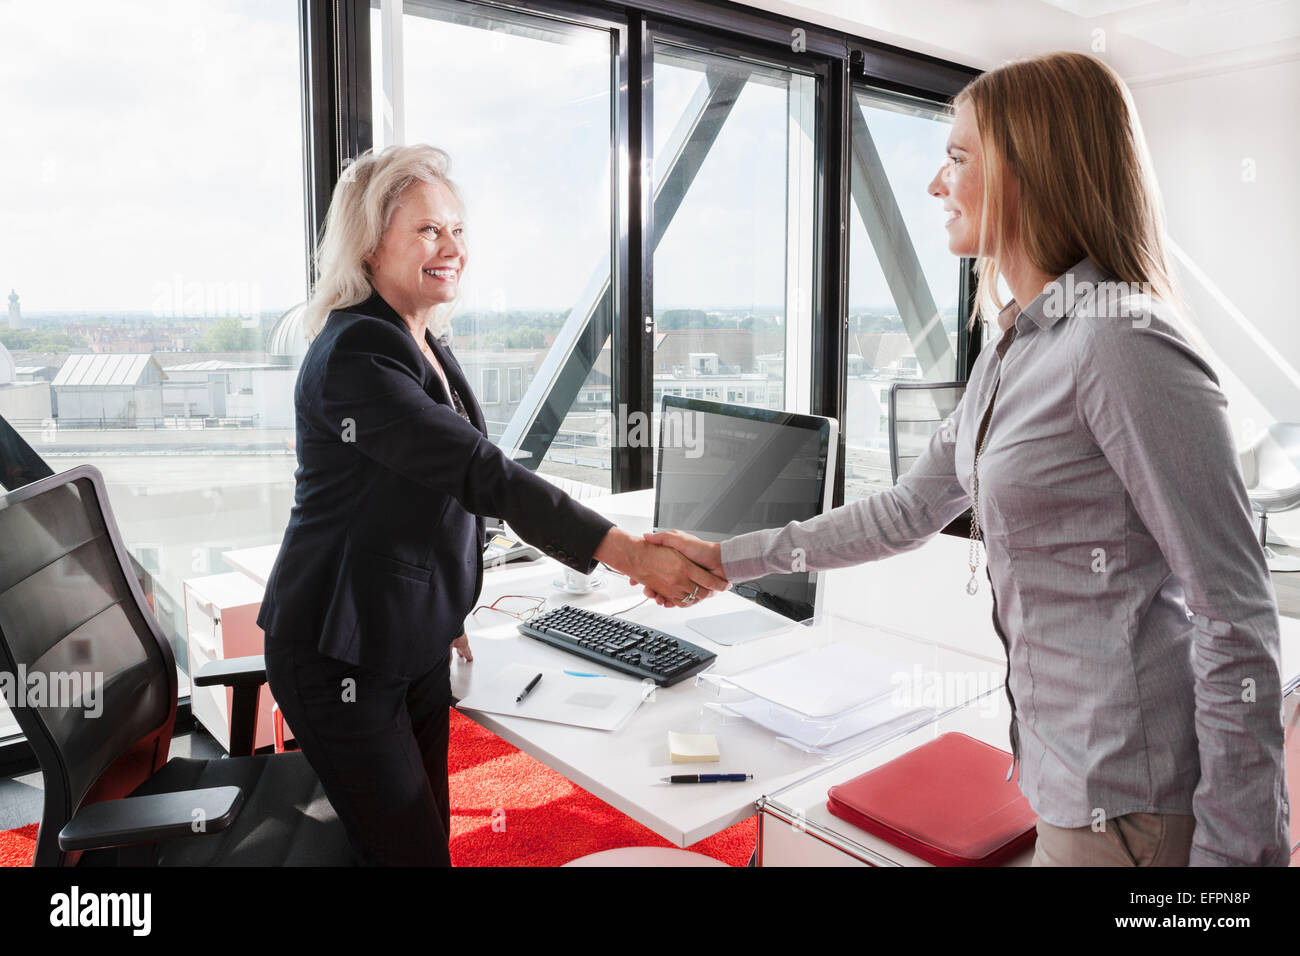 Two women shaking hands in office Stock Photo